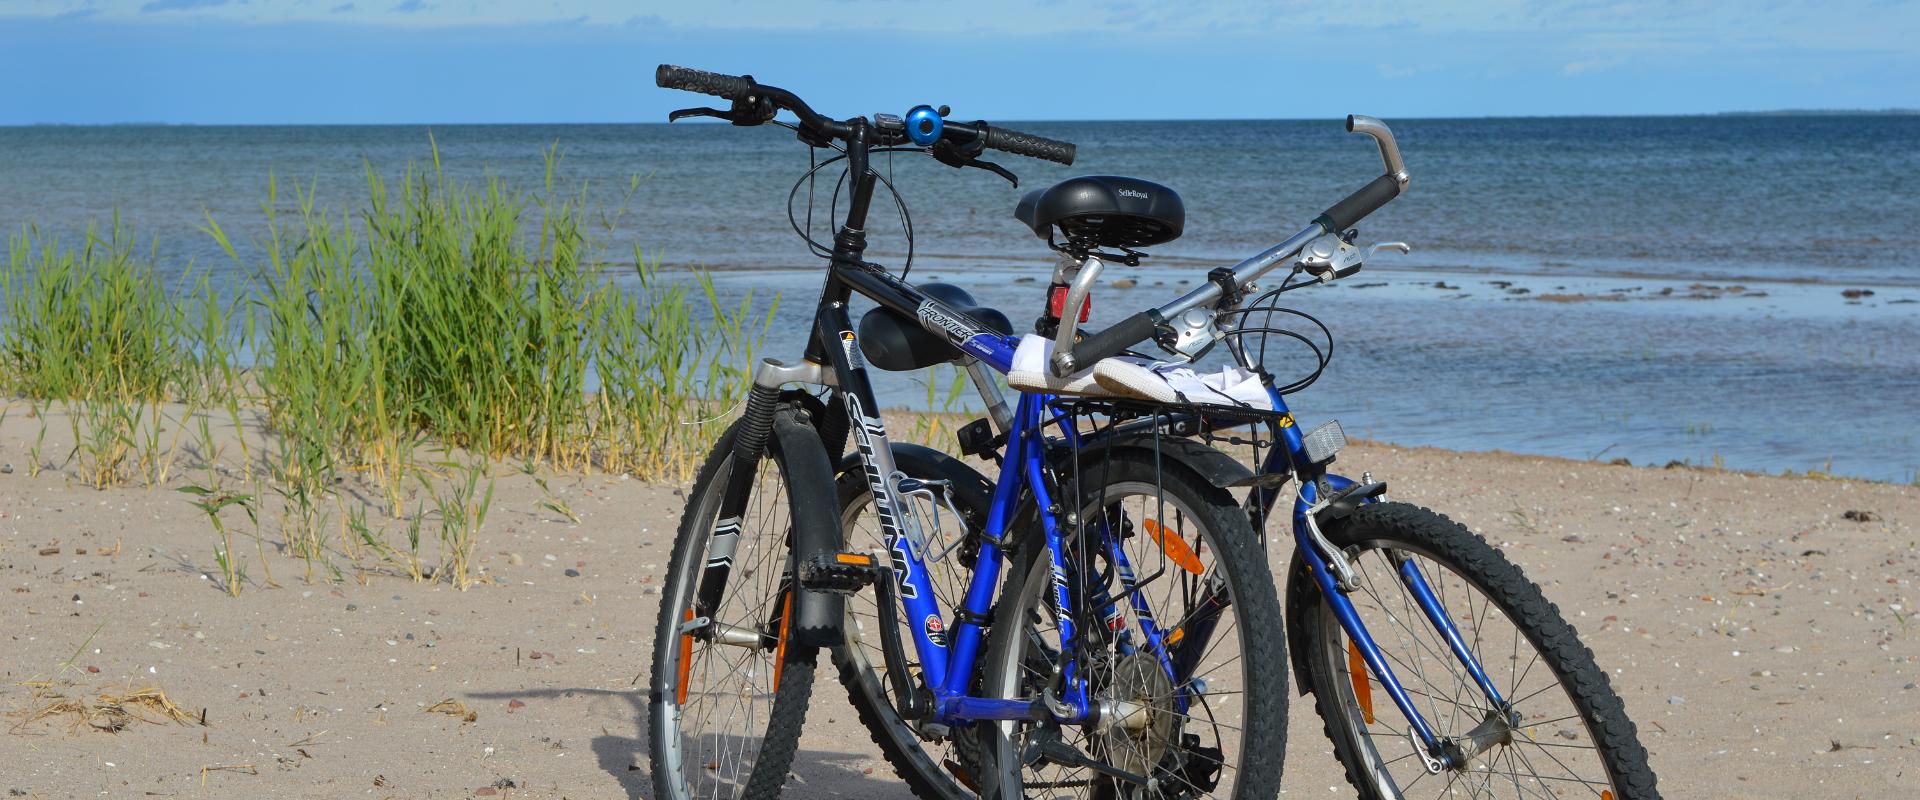 A bicycle is perfect to discover the untouched nature of Saaremaa and the lovely little town of Kuressaare. We welcome you, dear guest, to choose a su